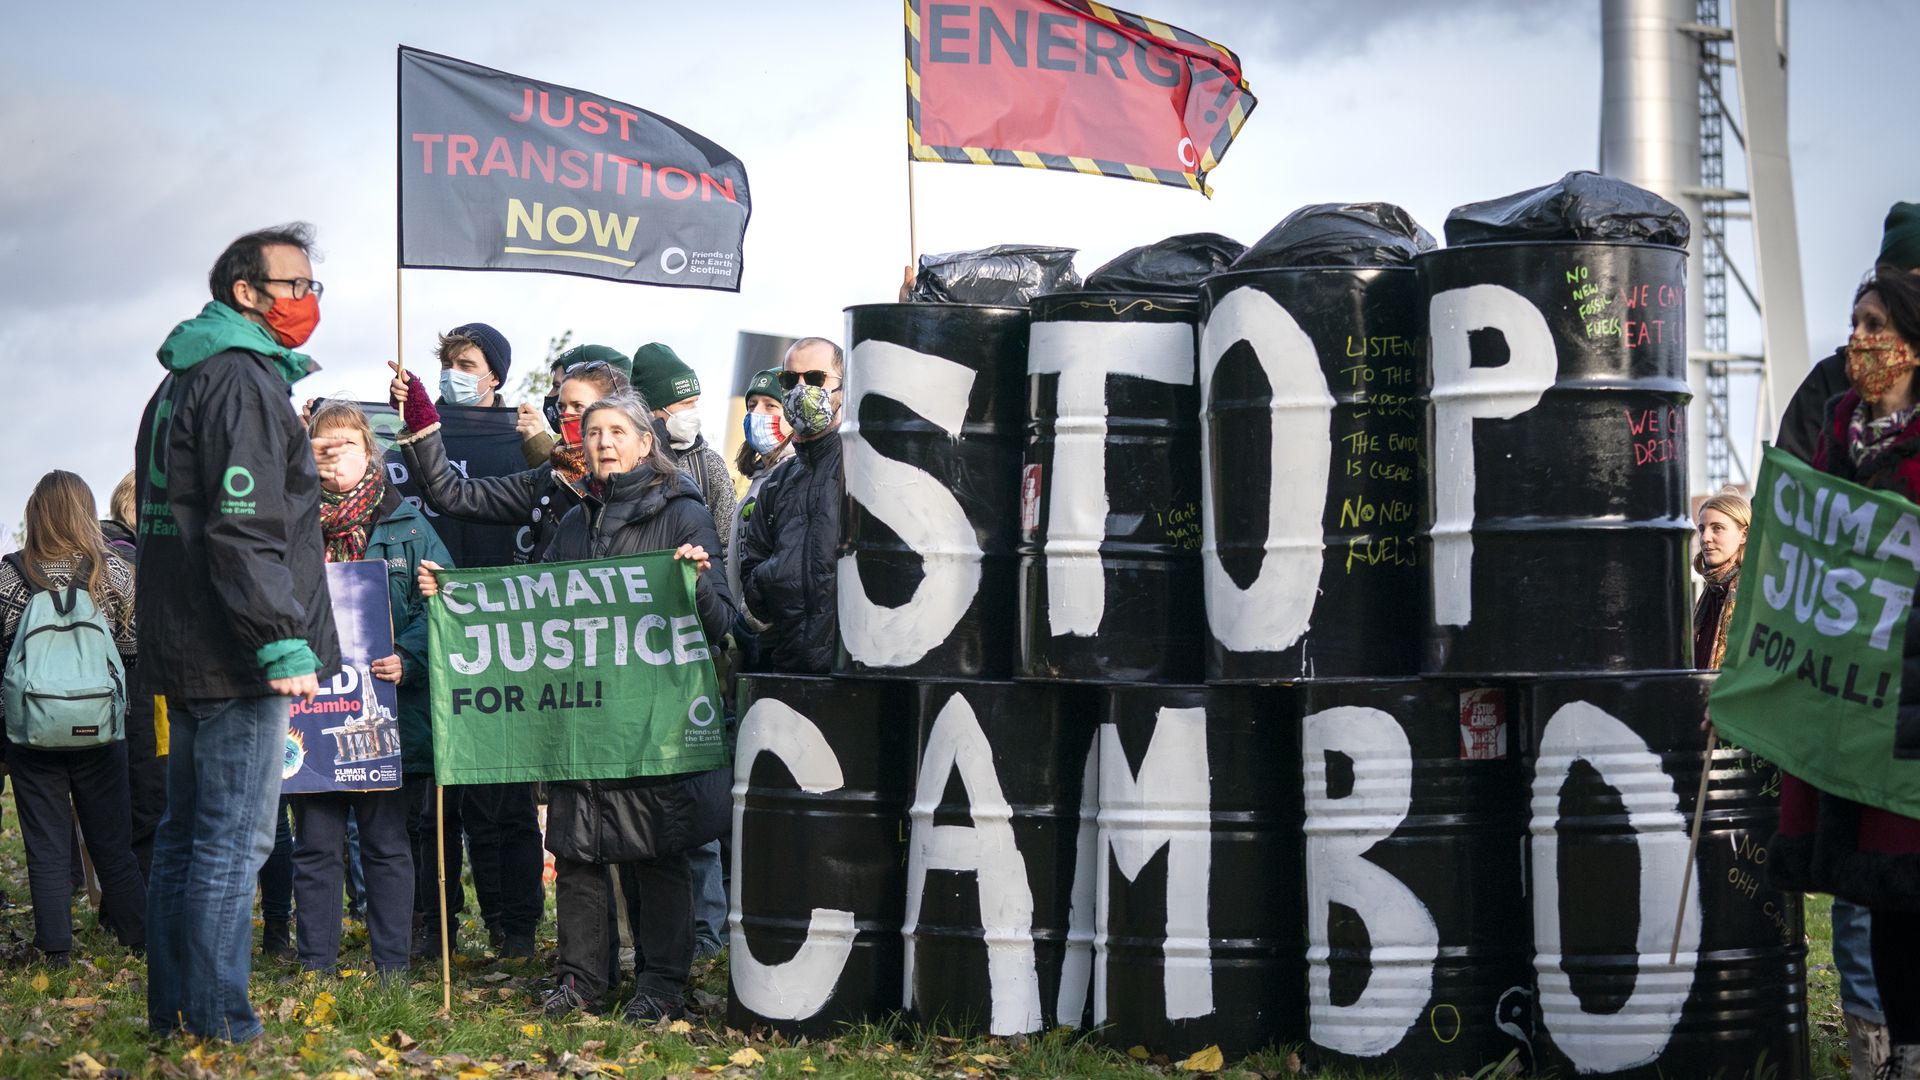 Climate activists protesting the Cambo project during the Cop26 summit in Glasgow in November 2021.